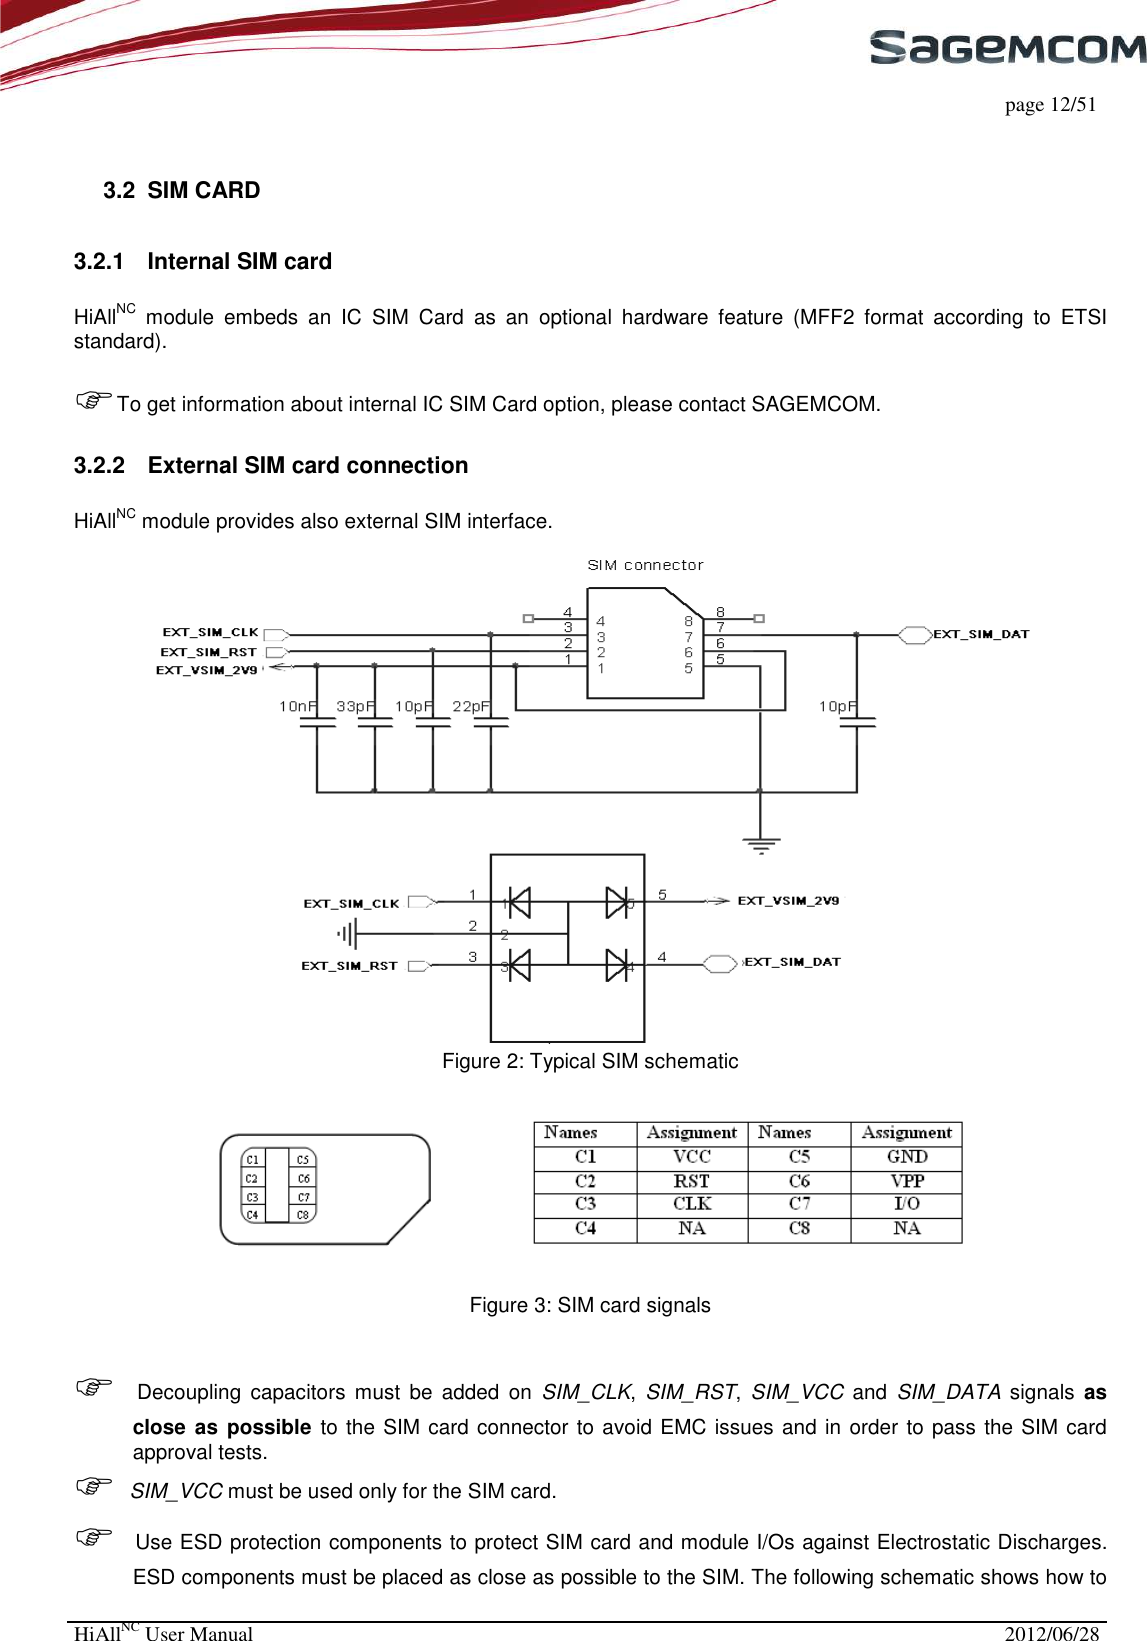     page 12/51 HiAllNC User Manual  2012/06/28   3.2  SIM CARD 3.2.1  Internal SIM card  HiAllNC  module  embeds  an  IC  SIM  Card  as  an  optional  hardware  feature  (MFF2  format  according  to  ETSI standard).  To get information about internal IC SIM Card option, please contact SAGEMCOM. 3.2.2  External SIM card connection  HiAllNC module provides also external SIM interface.   Figure 2: Typical SIM schematic   Figure 3: SIM card signals    Decoupling  capacitors  must  be  added  on  SIM_CLK,  SIM_RST,  SIM_VCC  and  SIM_DATA  signals  as close as  possible  to the SIM card connector to avoid EMC issues and in order to pass the SIM card approval tests.  SIM_VCC must be used only for the SIM card.  Use ESD protection components to protect SIM card and module I/Os against Electrostatic Discharges. ESD components must be placed as close as possible to the SIM. The following schematic shows how to 